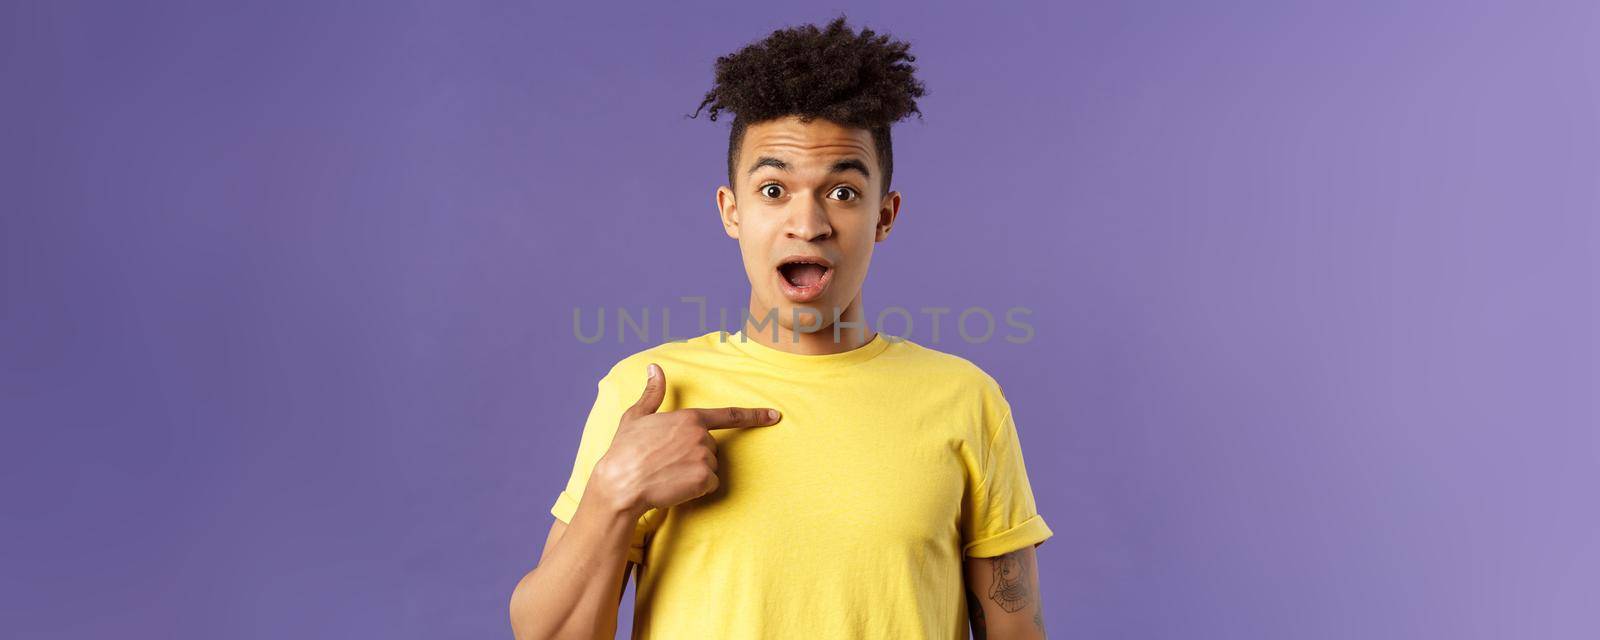 Who me, no way. Portrait of surprised, happy rejoicing young man looking with disbelies as being chosen from all candidates, pointing at himself open mouth fascinated, purple background.